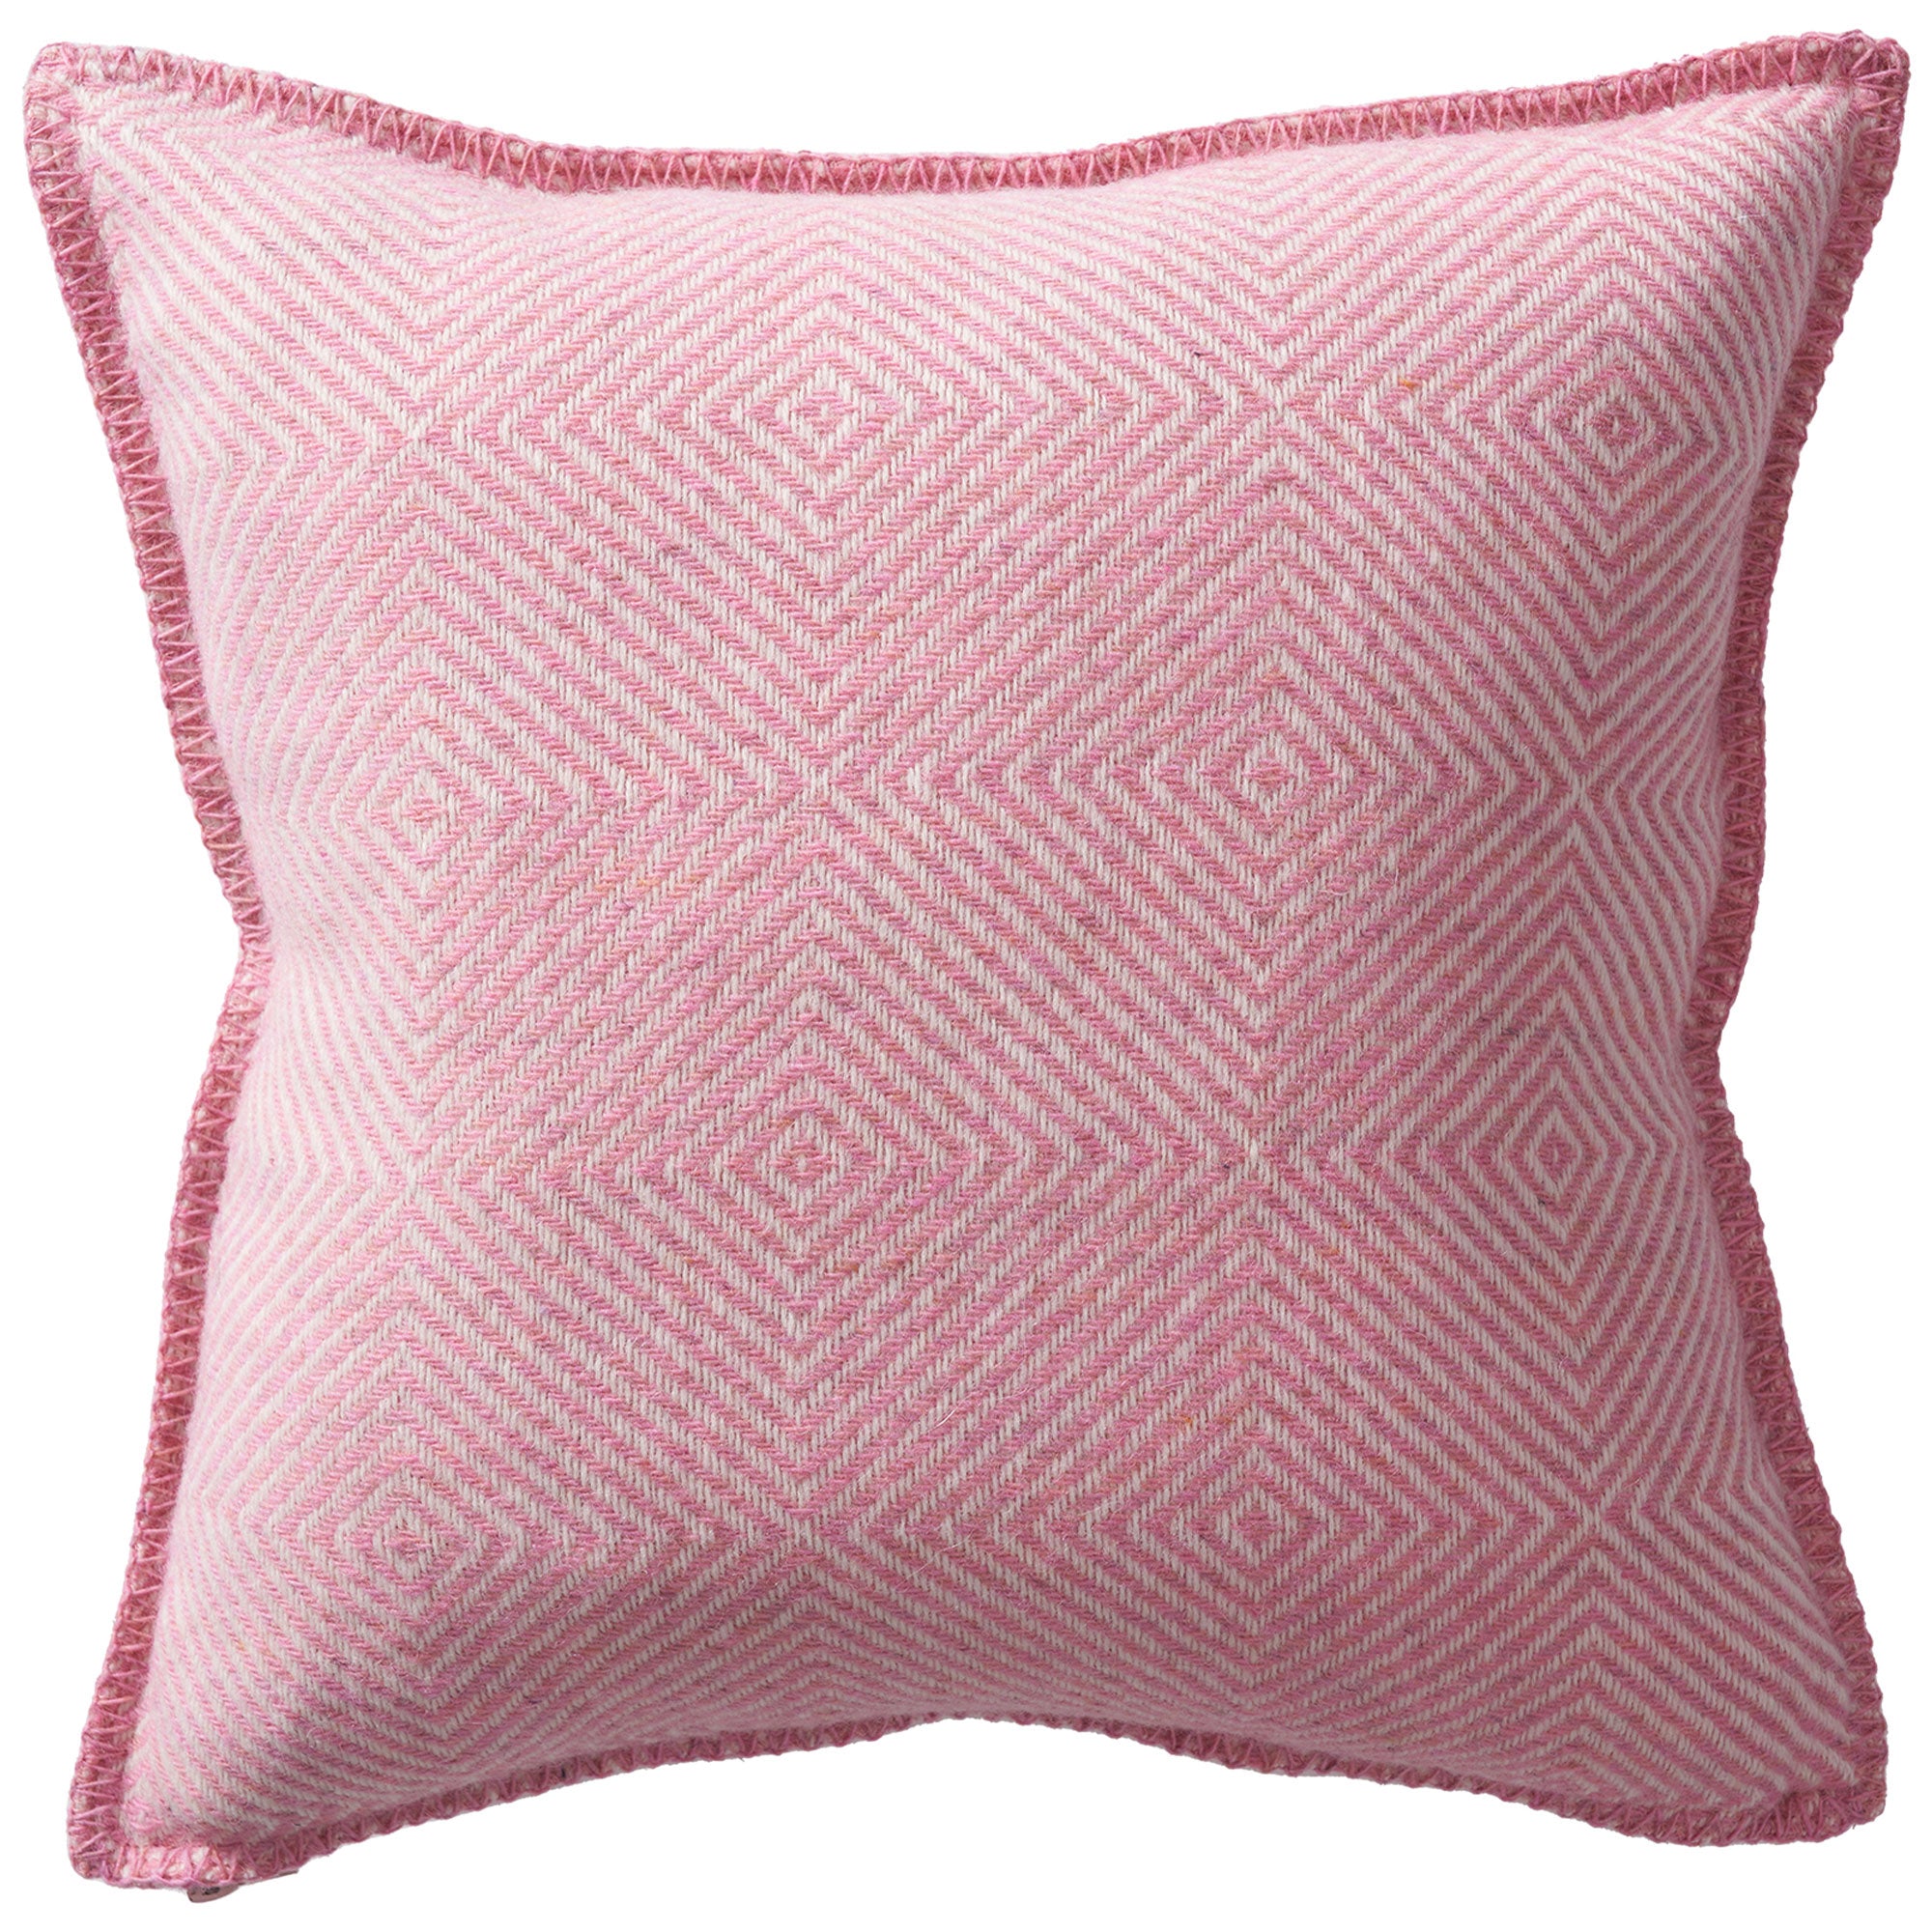 Gooseye Pink 45x45cm Recycled Wool Cushion Cover